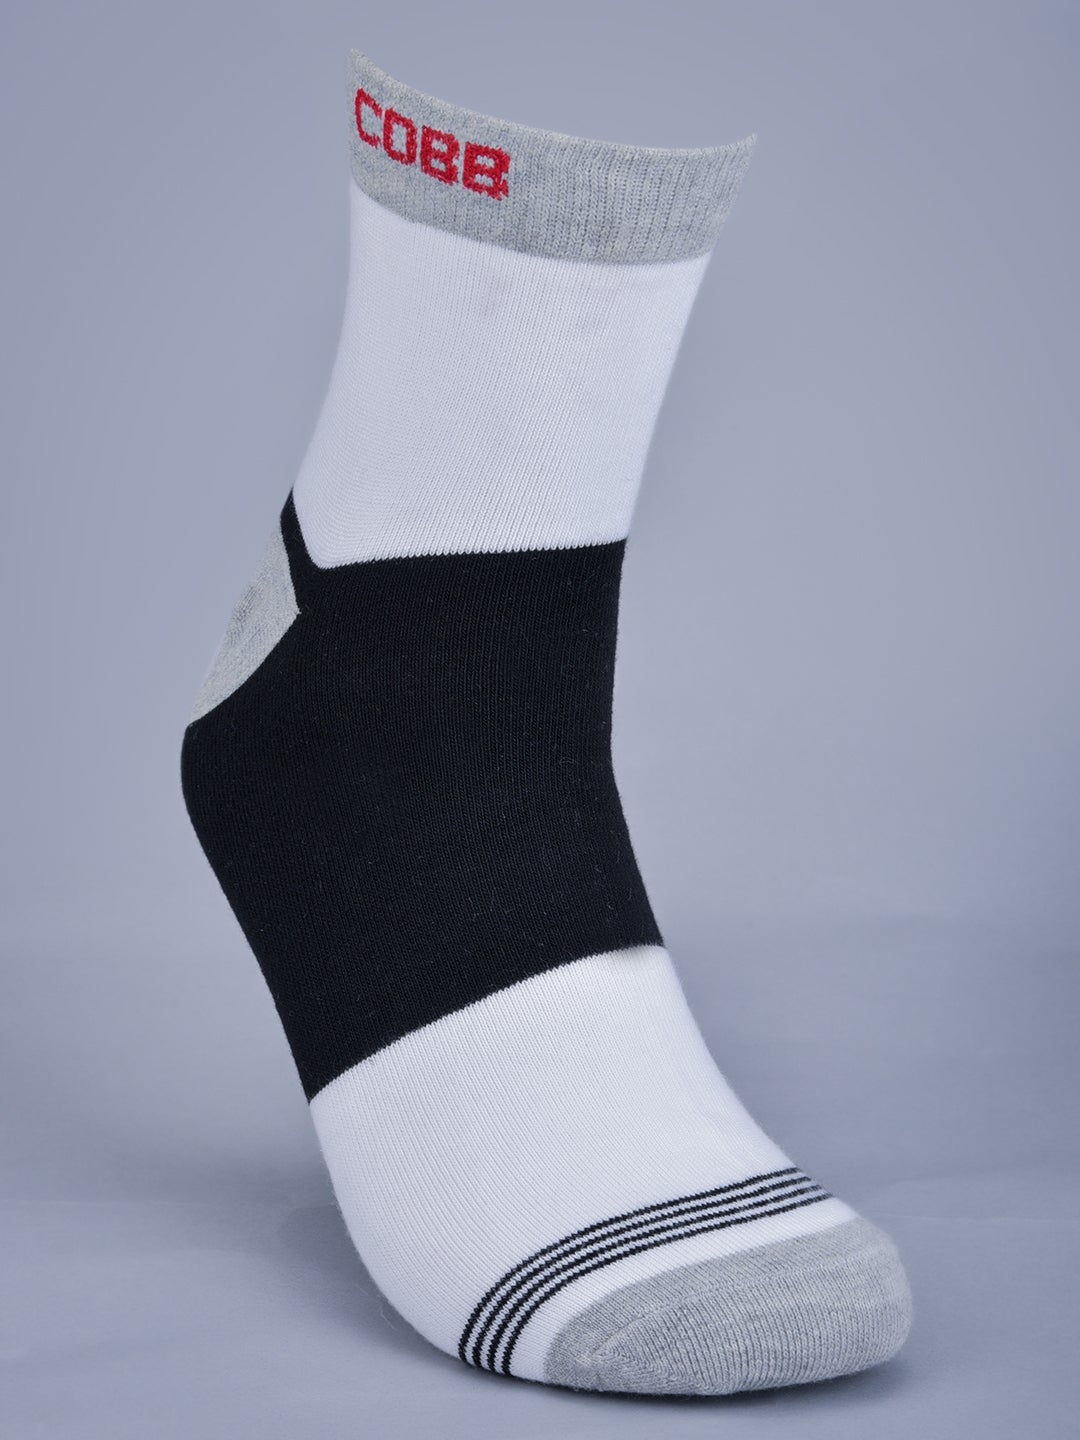 Buy White Half Ankle Socks Online - Comfortable and Breathable